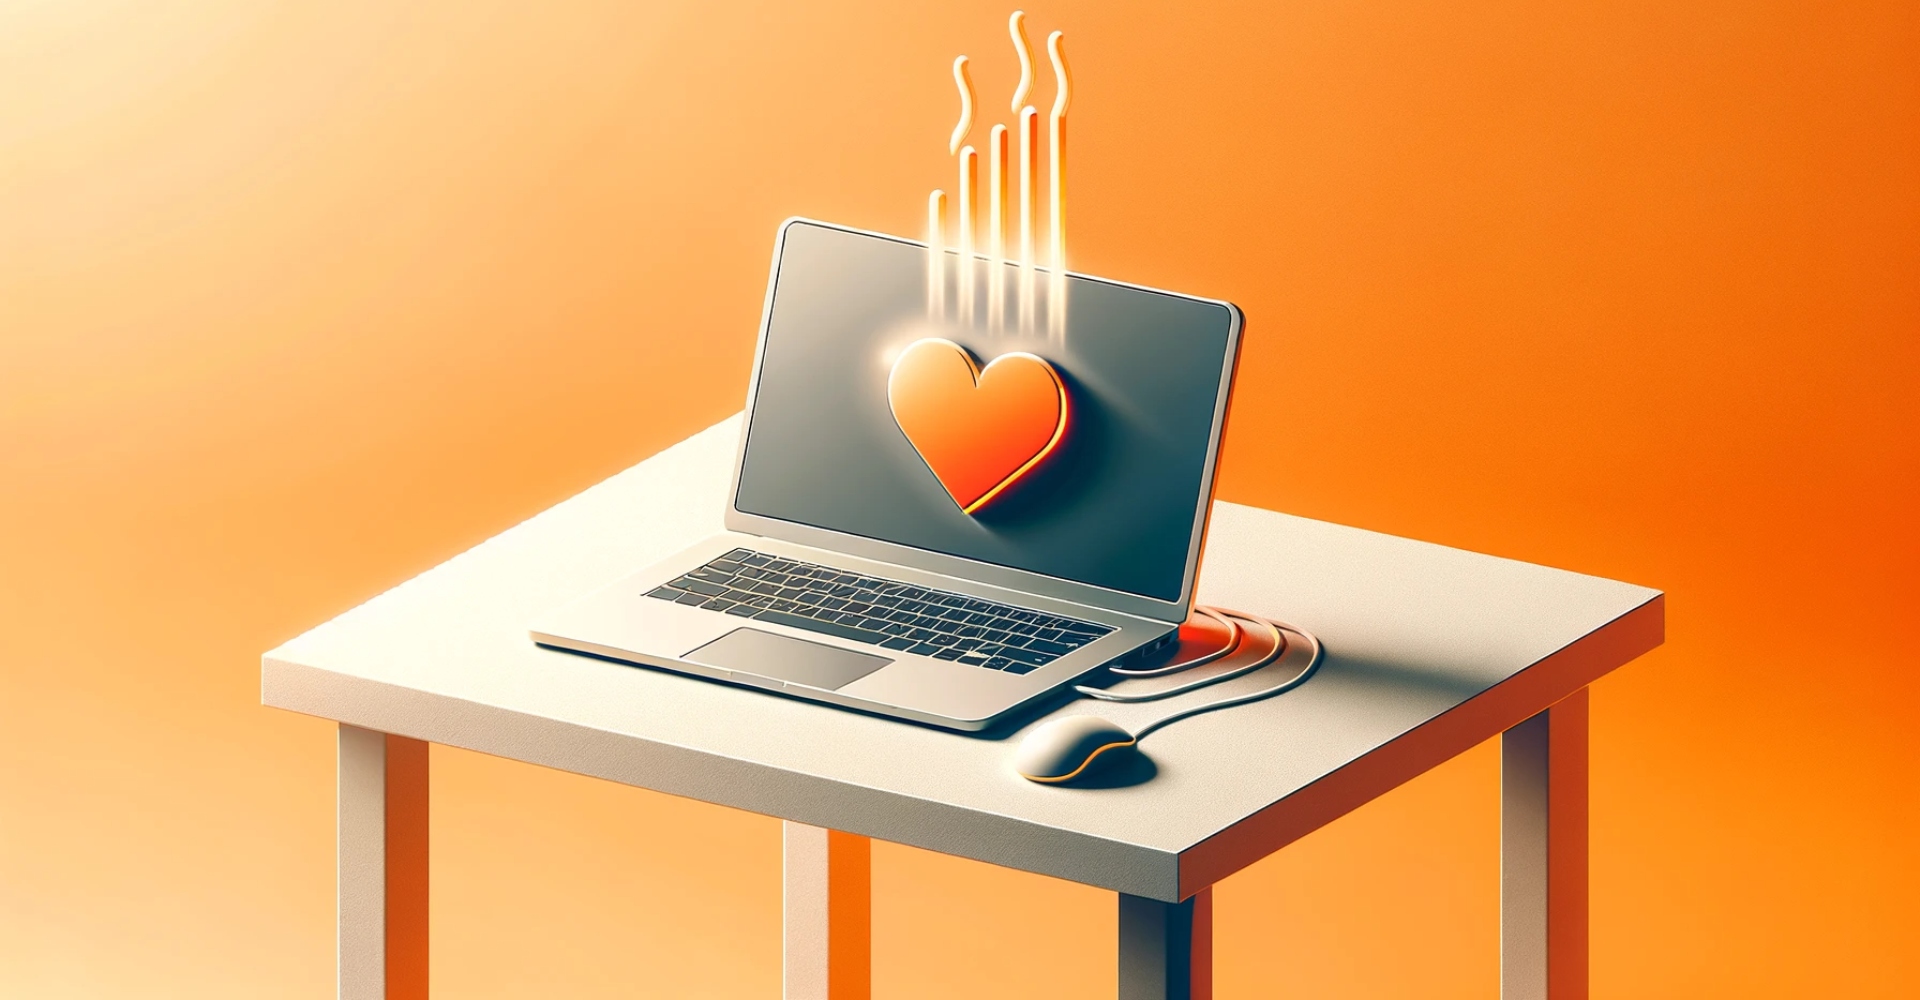 Show your digital devices some love this Valentine’s Day